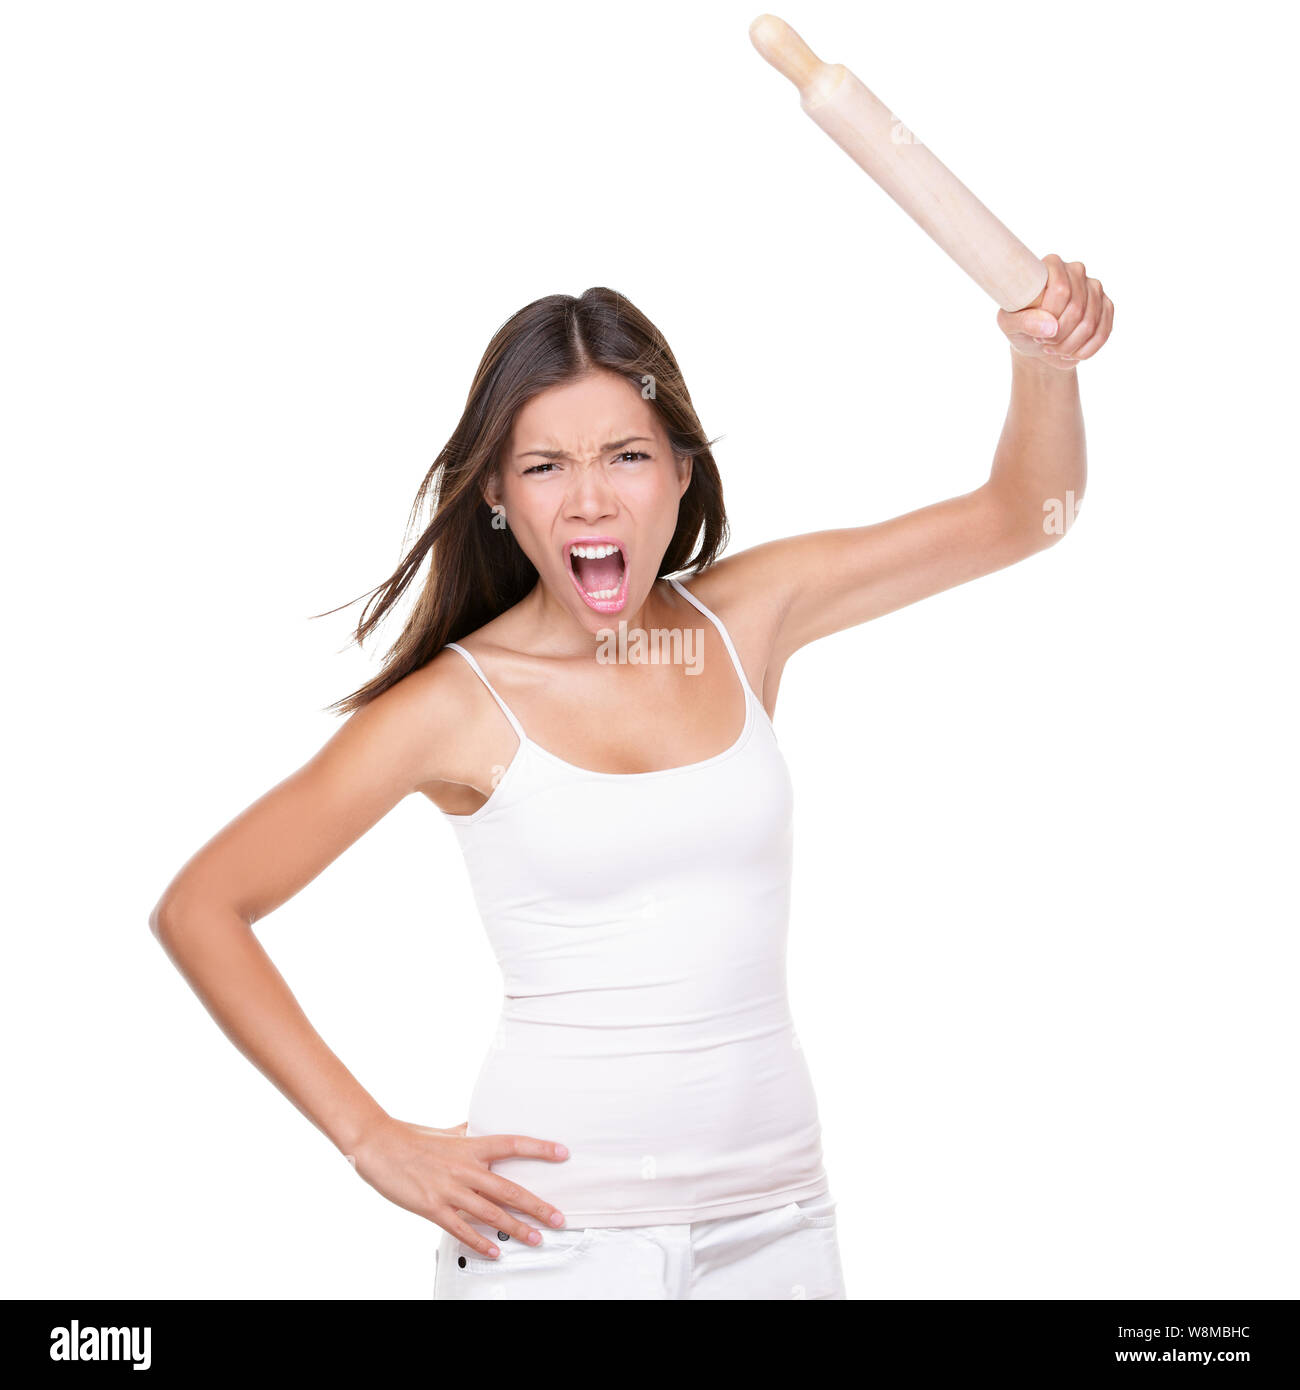 Crazy upset housewife or chef woman holding up a rolling pin in anger threatening to hit in violence, isolated on white studio background. Funny negative expression Asian girl screaming at camera. Stock Photo